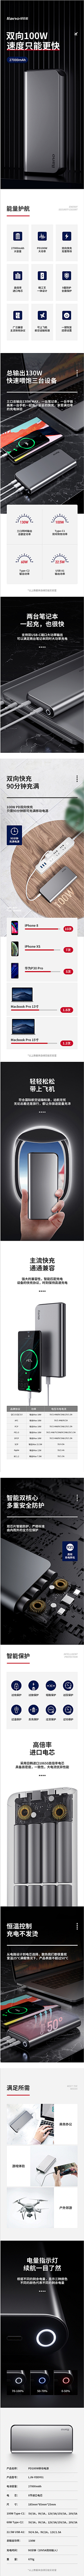 CHTy8jqy采集到产品造型